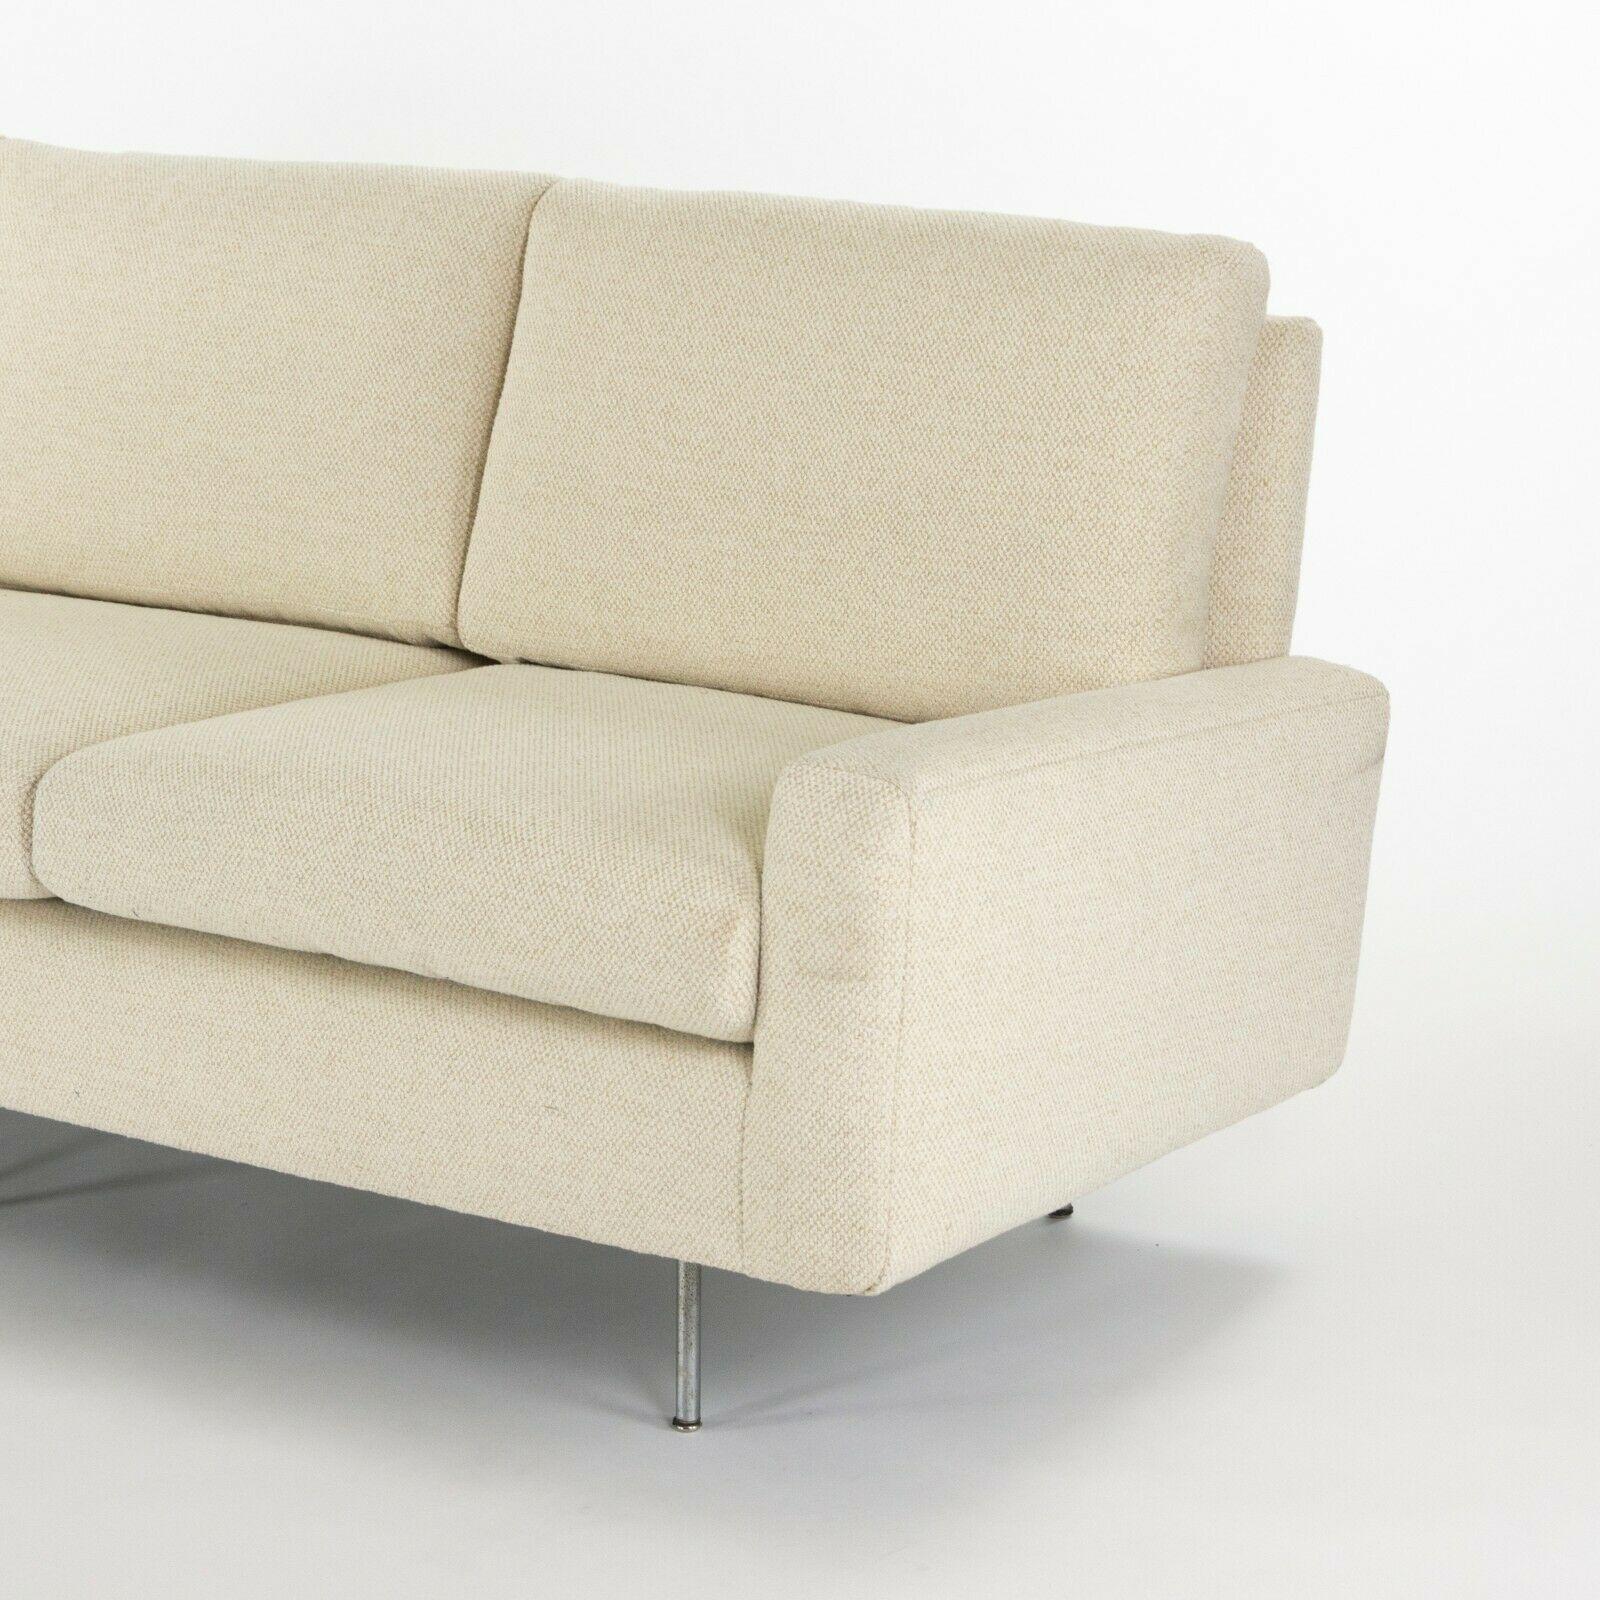 1949 Florence Knoll Associates 26 BC Upholstered 3-Seater Sofa New Upholstery For Sale 2